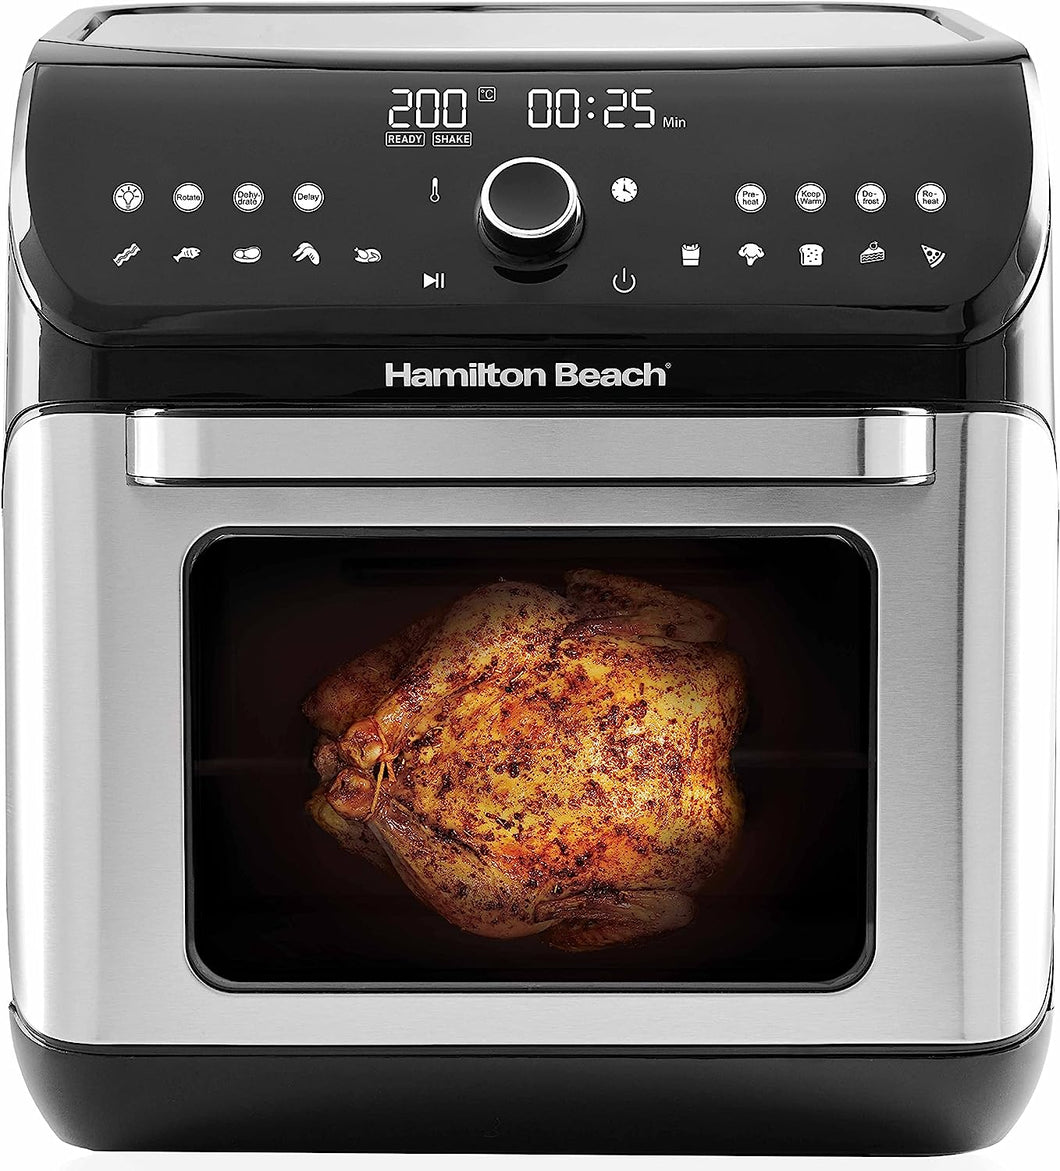 Hamilton Beach Digital Air Fryer Oven with 16 Cooking Modes and 7 Accessories - 12 Liters, 1500 Watts